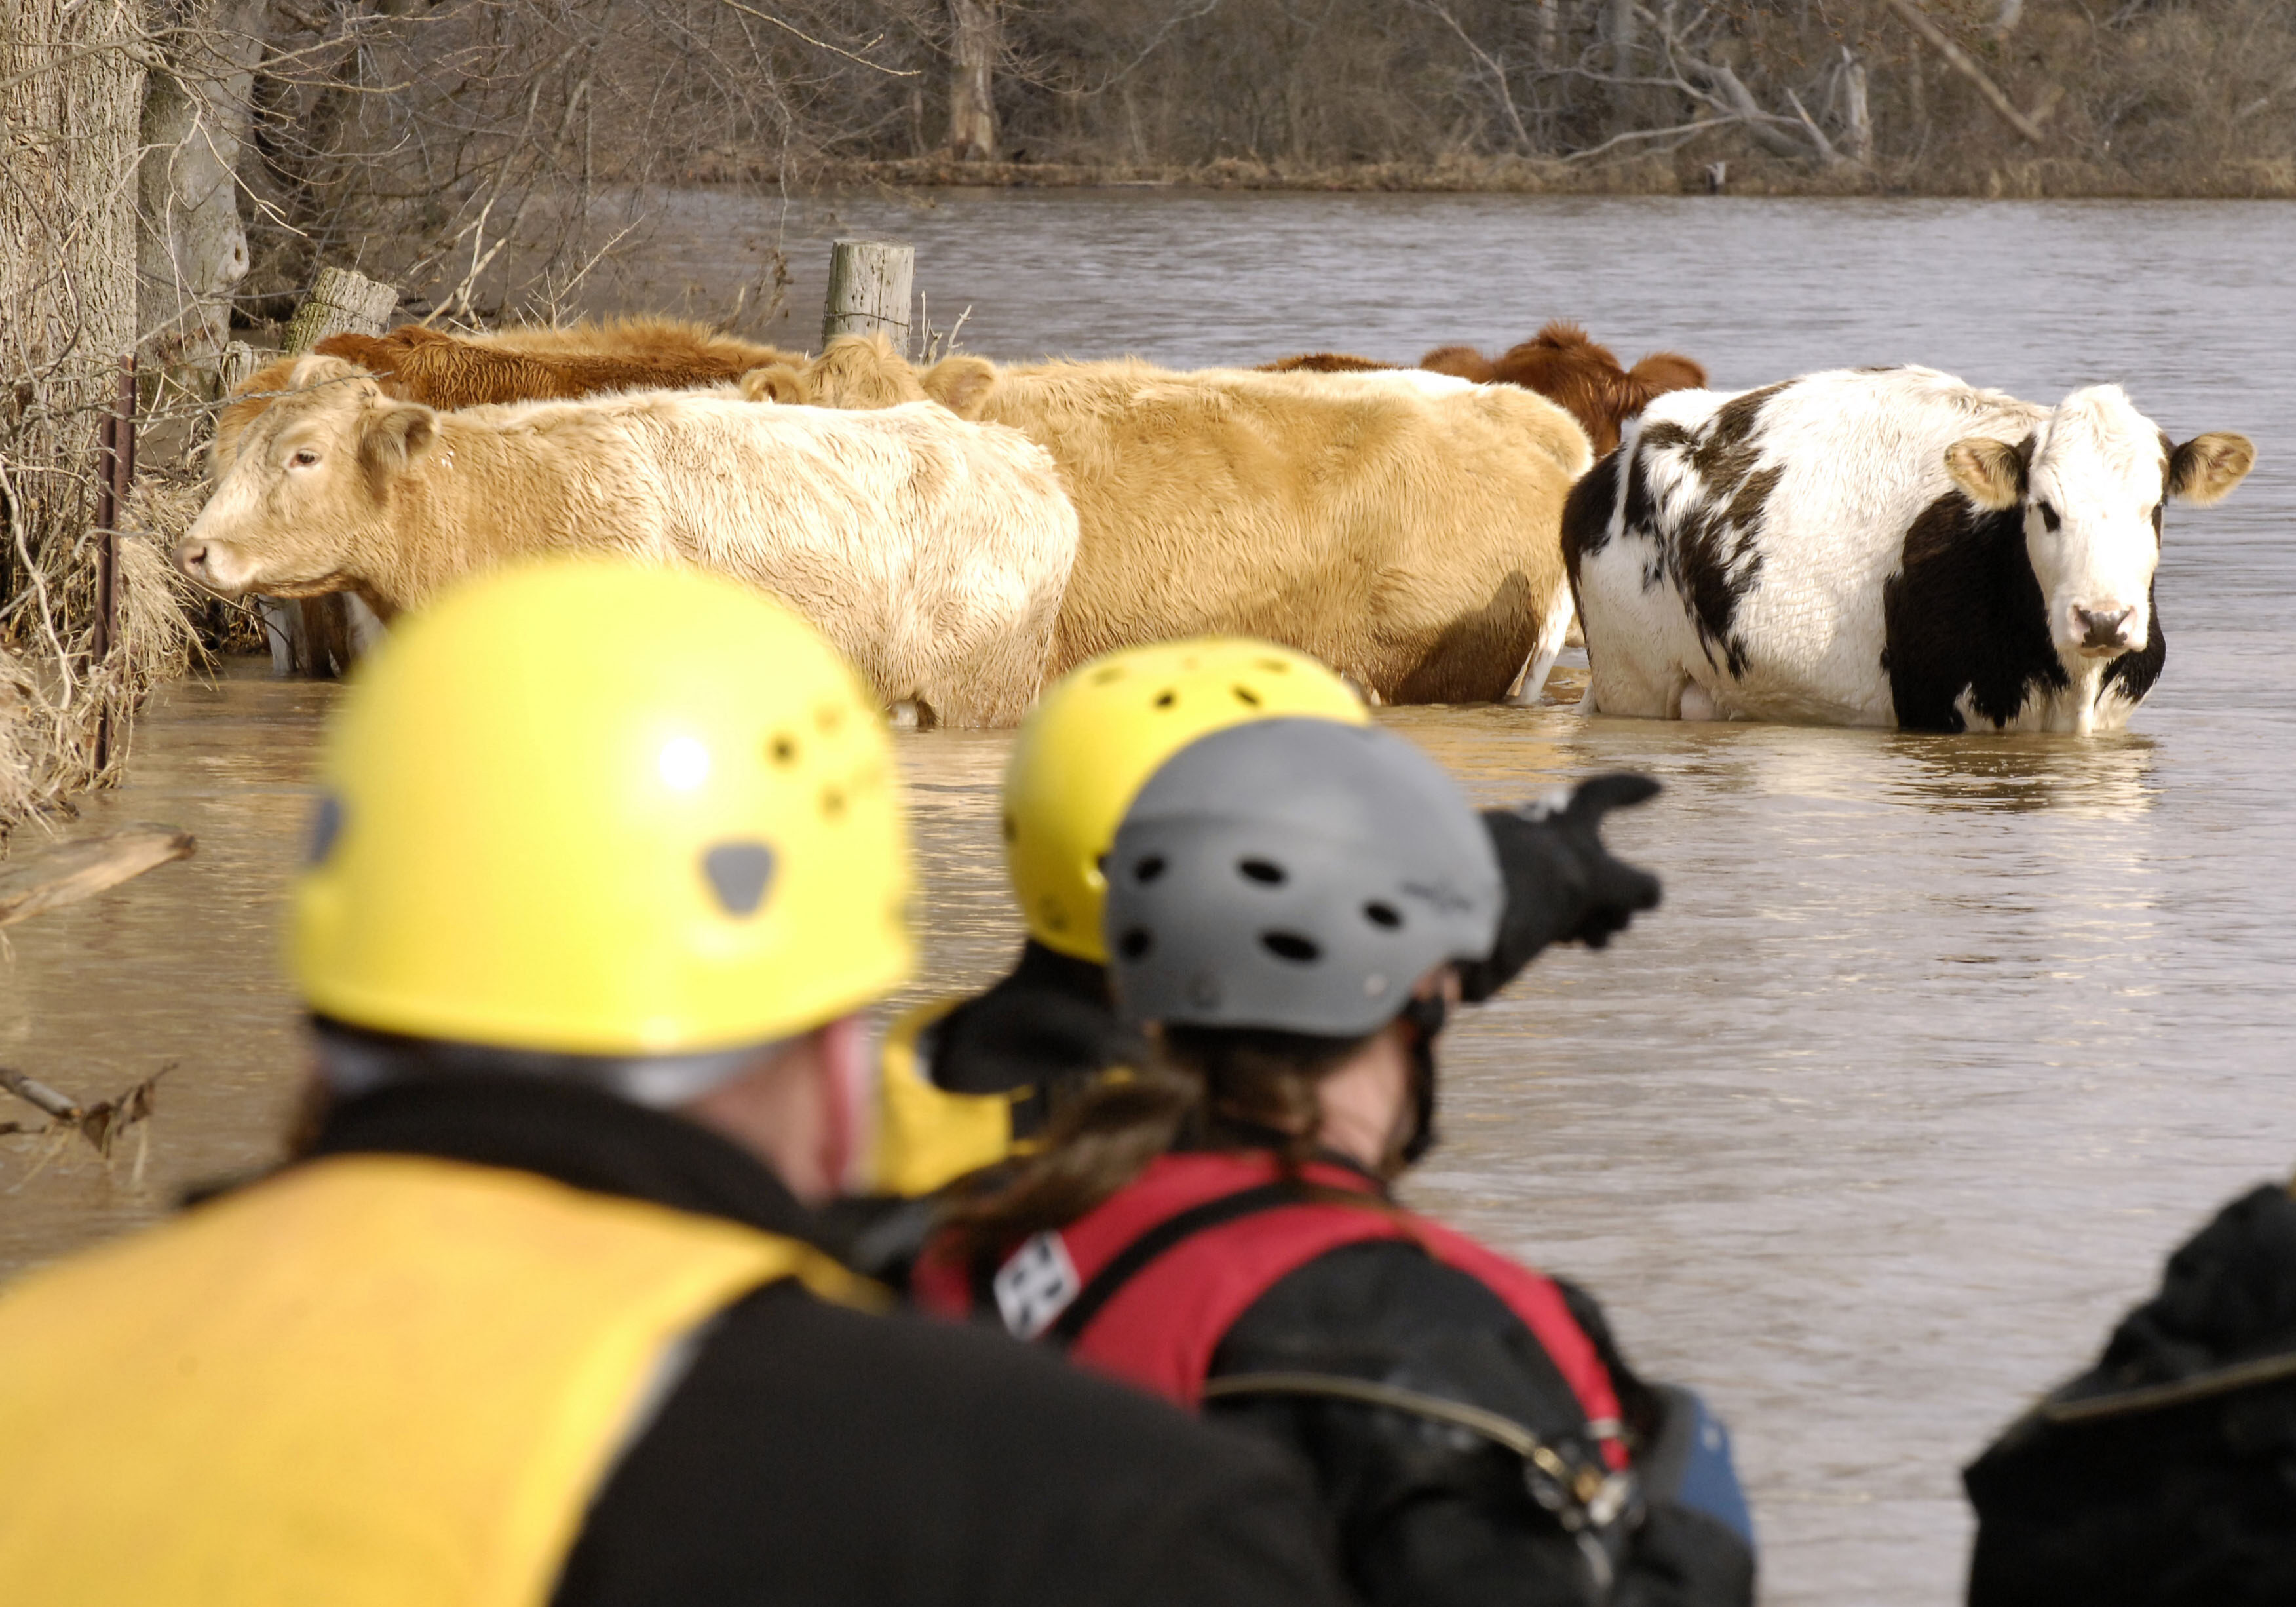 Eureka, MO- Members of the Missouri Emergency Response Service team, a non-profit that does large animal rescues,  launch a boat to take part in a  large animal rescue along with the Humane Society to rescue 13 cattle that were stuck in flood waters.

Jocelyn Augustino/FEMA